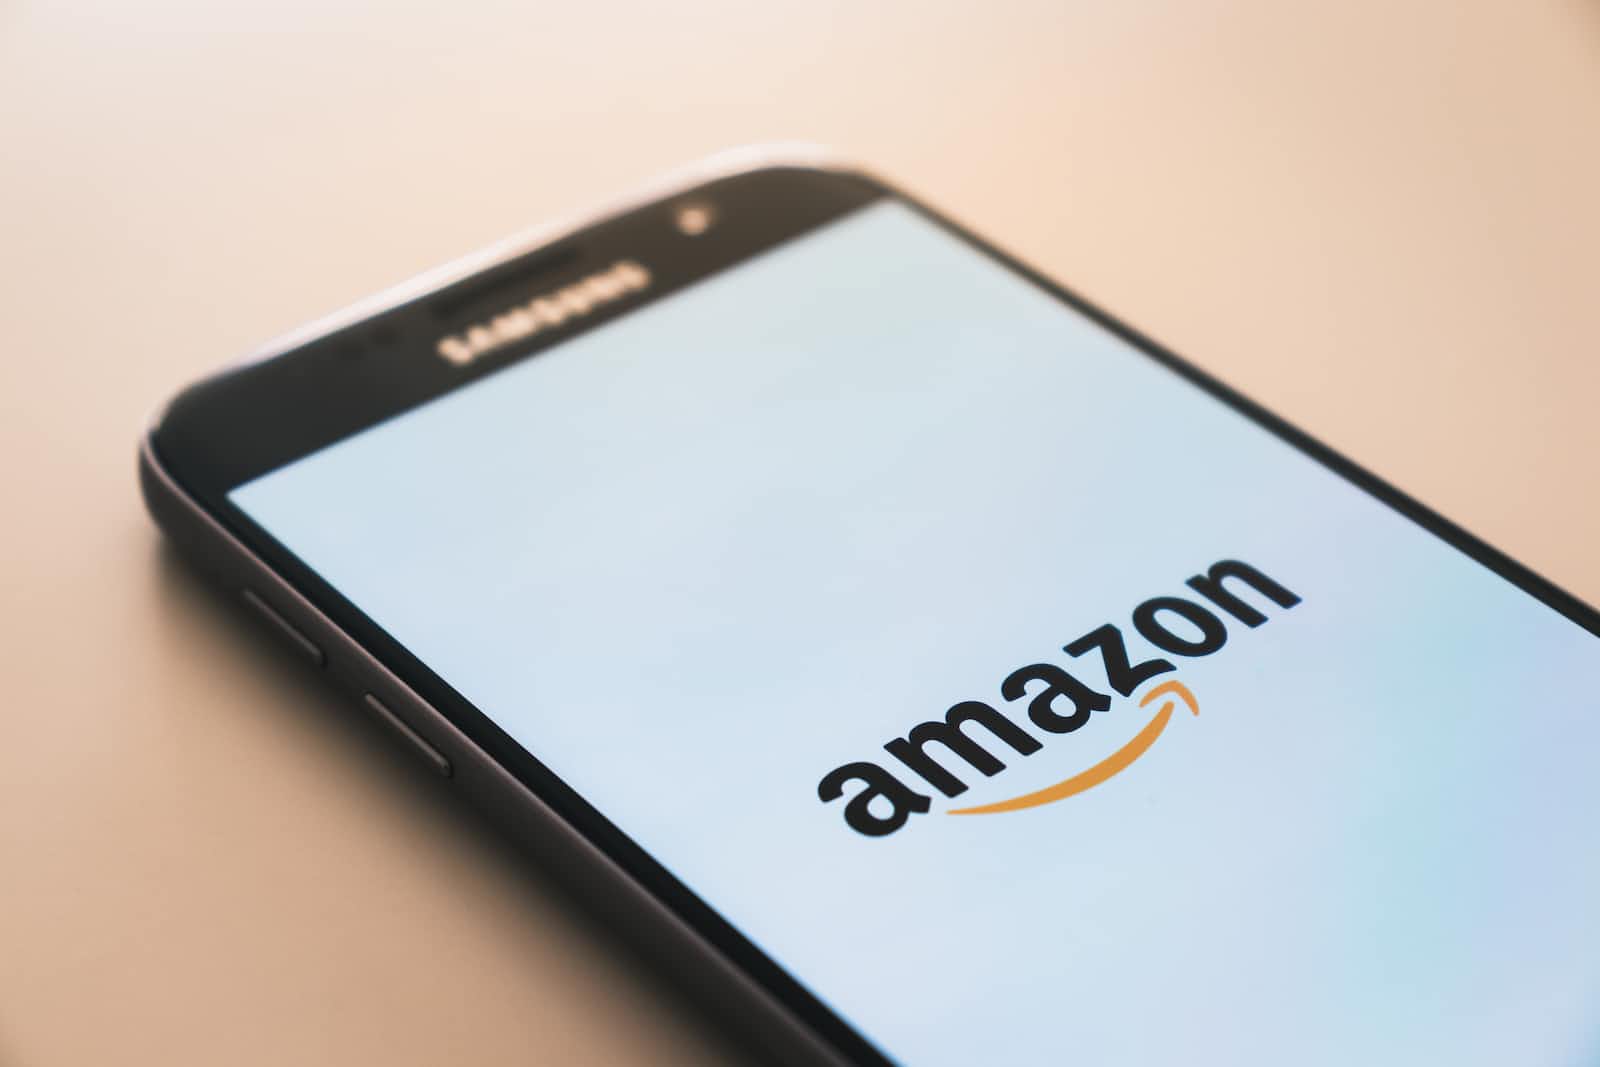 A mobile phone with the Amazon shopping app open